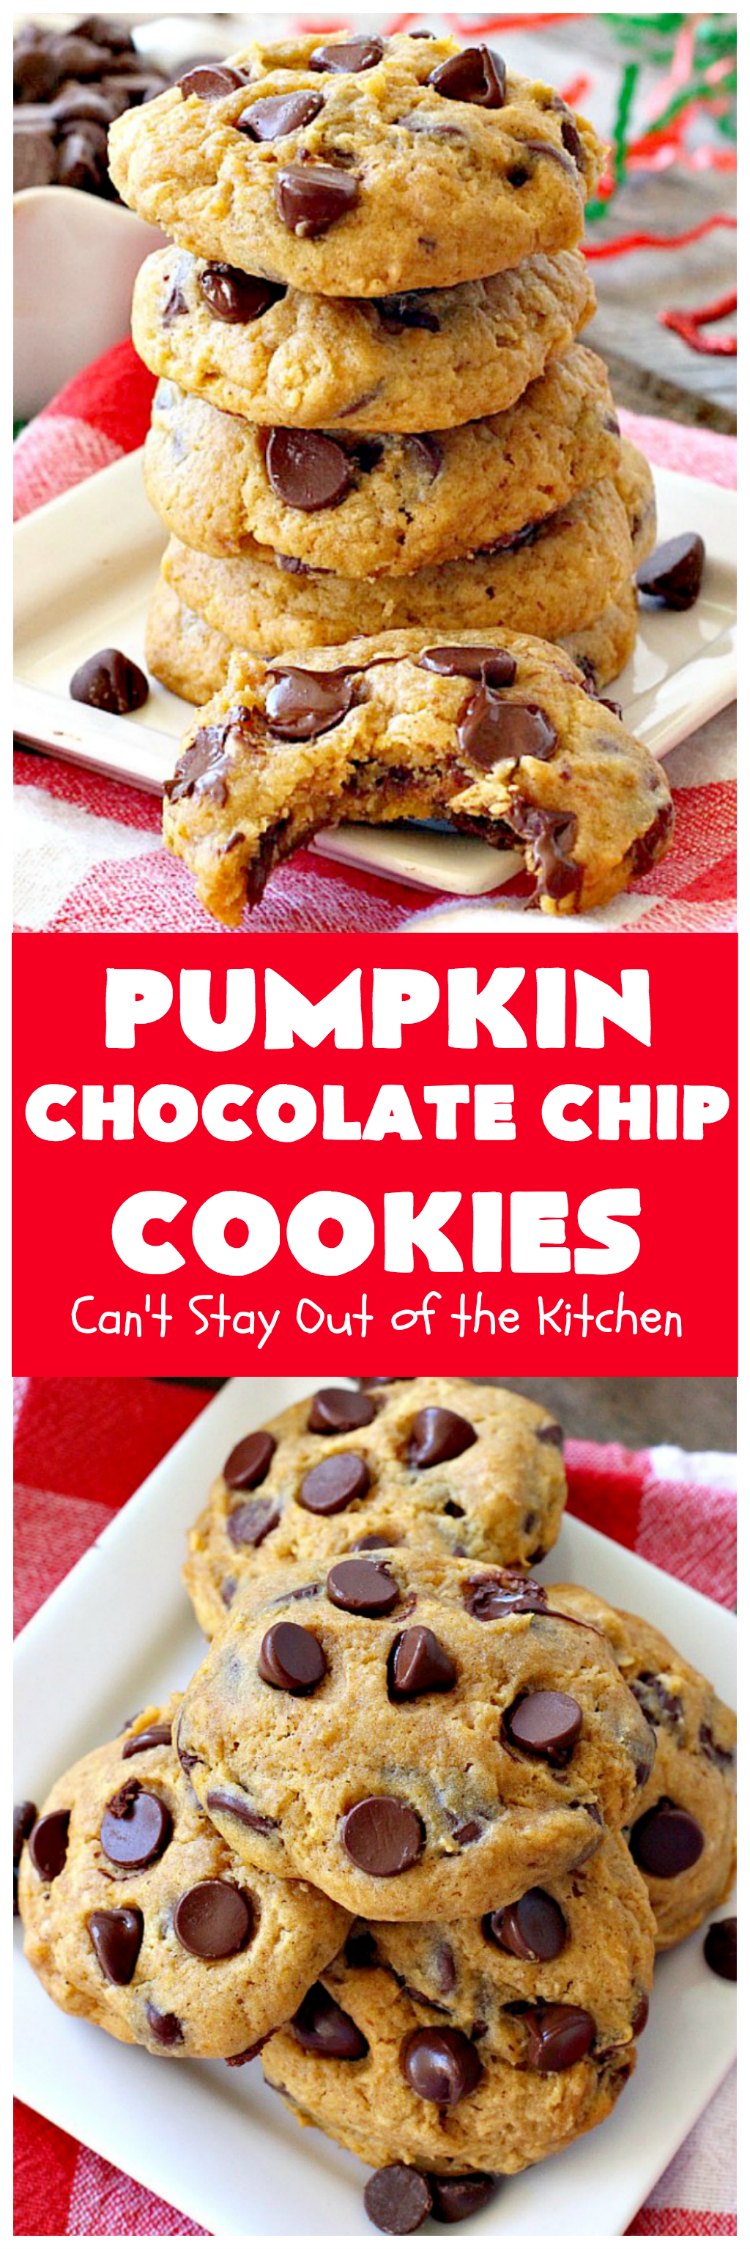 Pumpkin Chocolate Chip Cookies | Can't Stay Out of the Kitchen